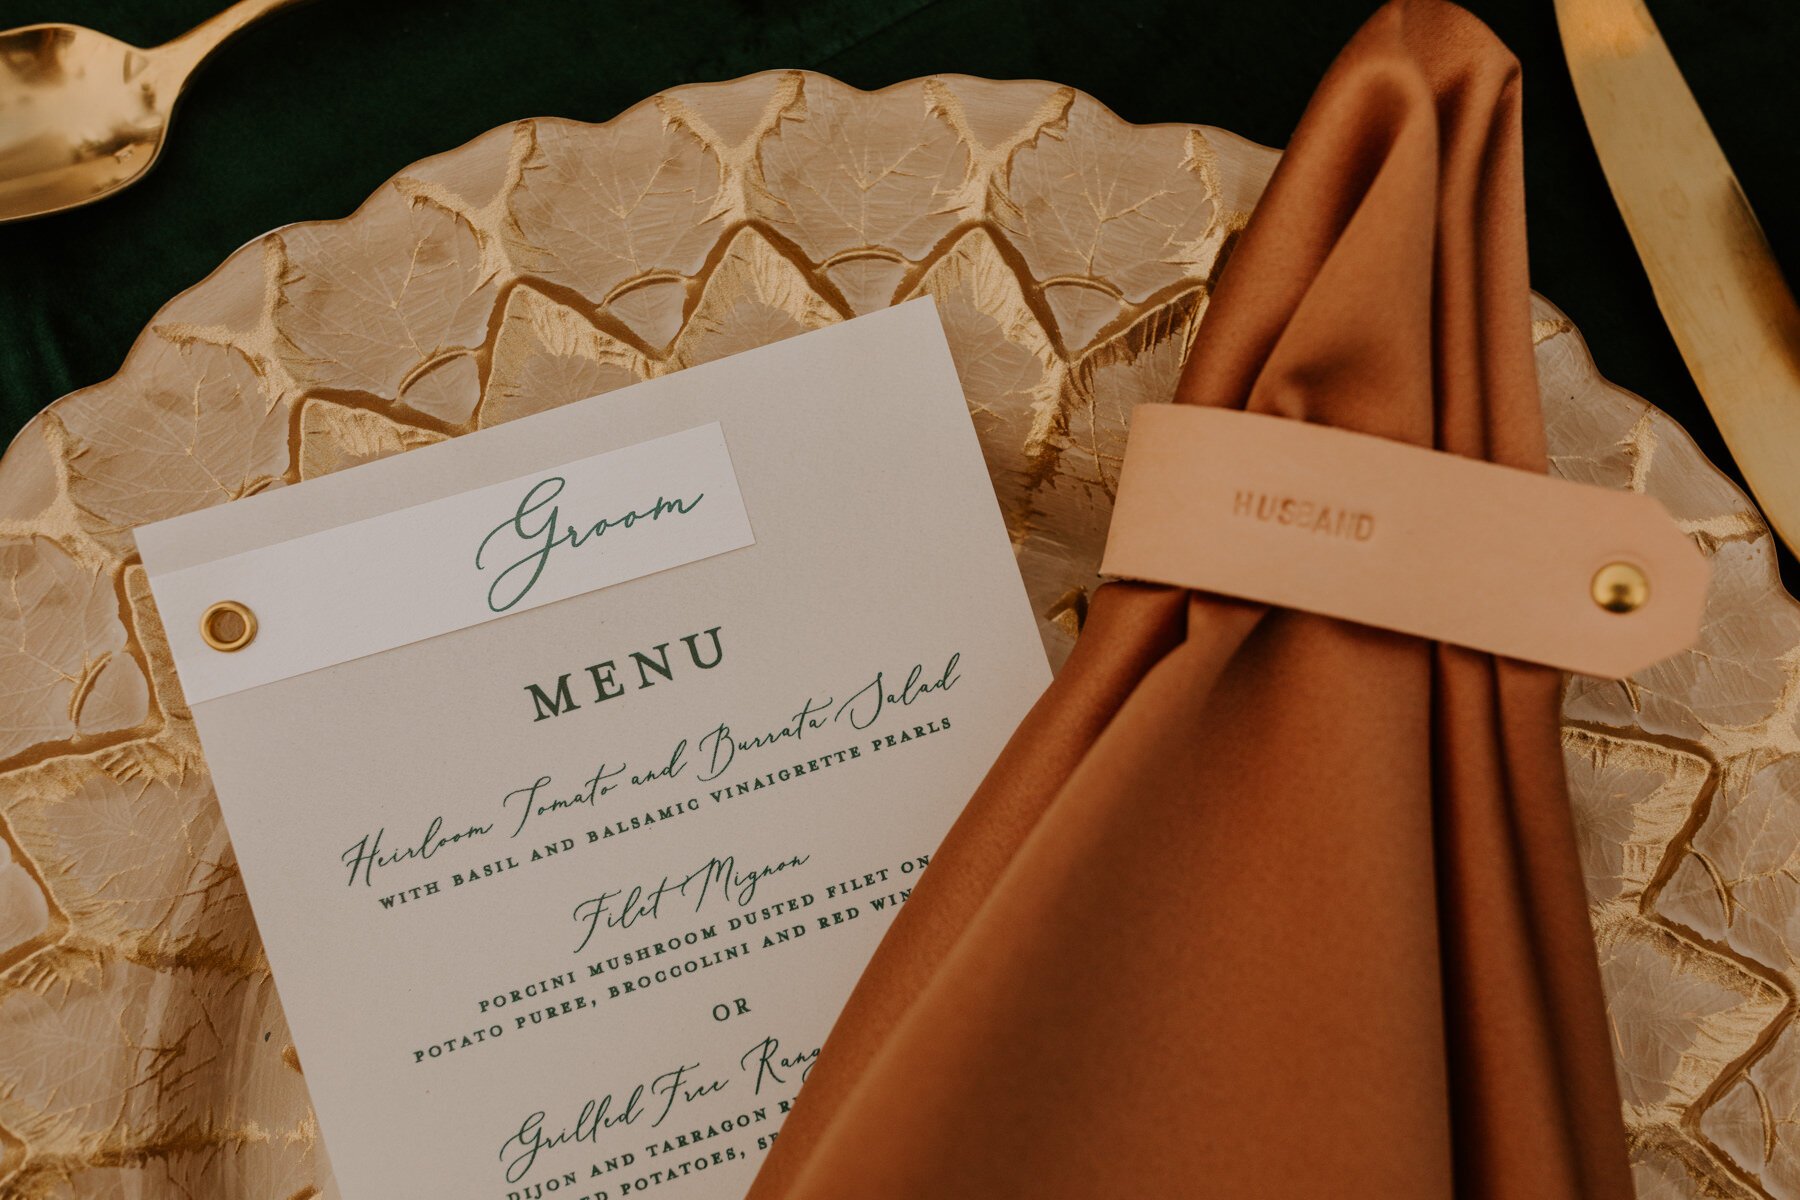 Gold charger, beige napkin, leather napkin ring, modern jewel toned inspired wedding place setting.